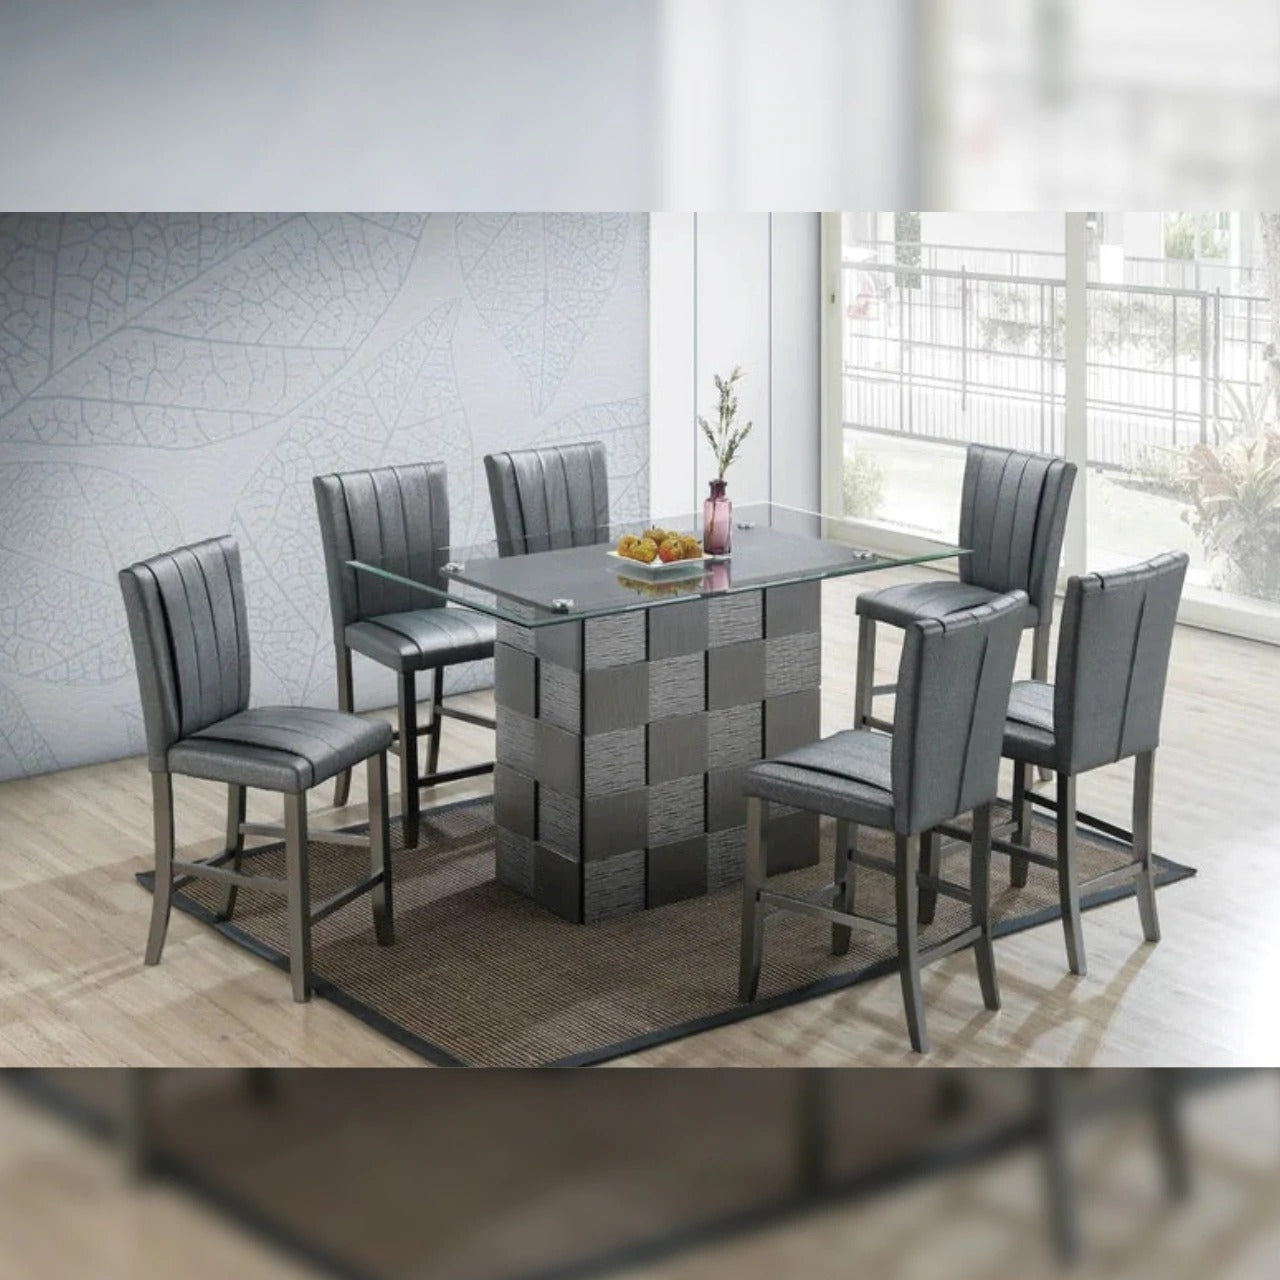 6 Seater Dining Table, Dining Table Set 6 Seater, 6 Seater Dining Table Size, 6 Seater Round Dining Table